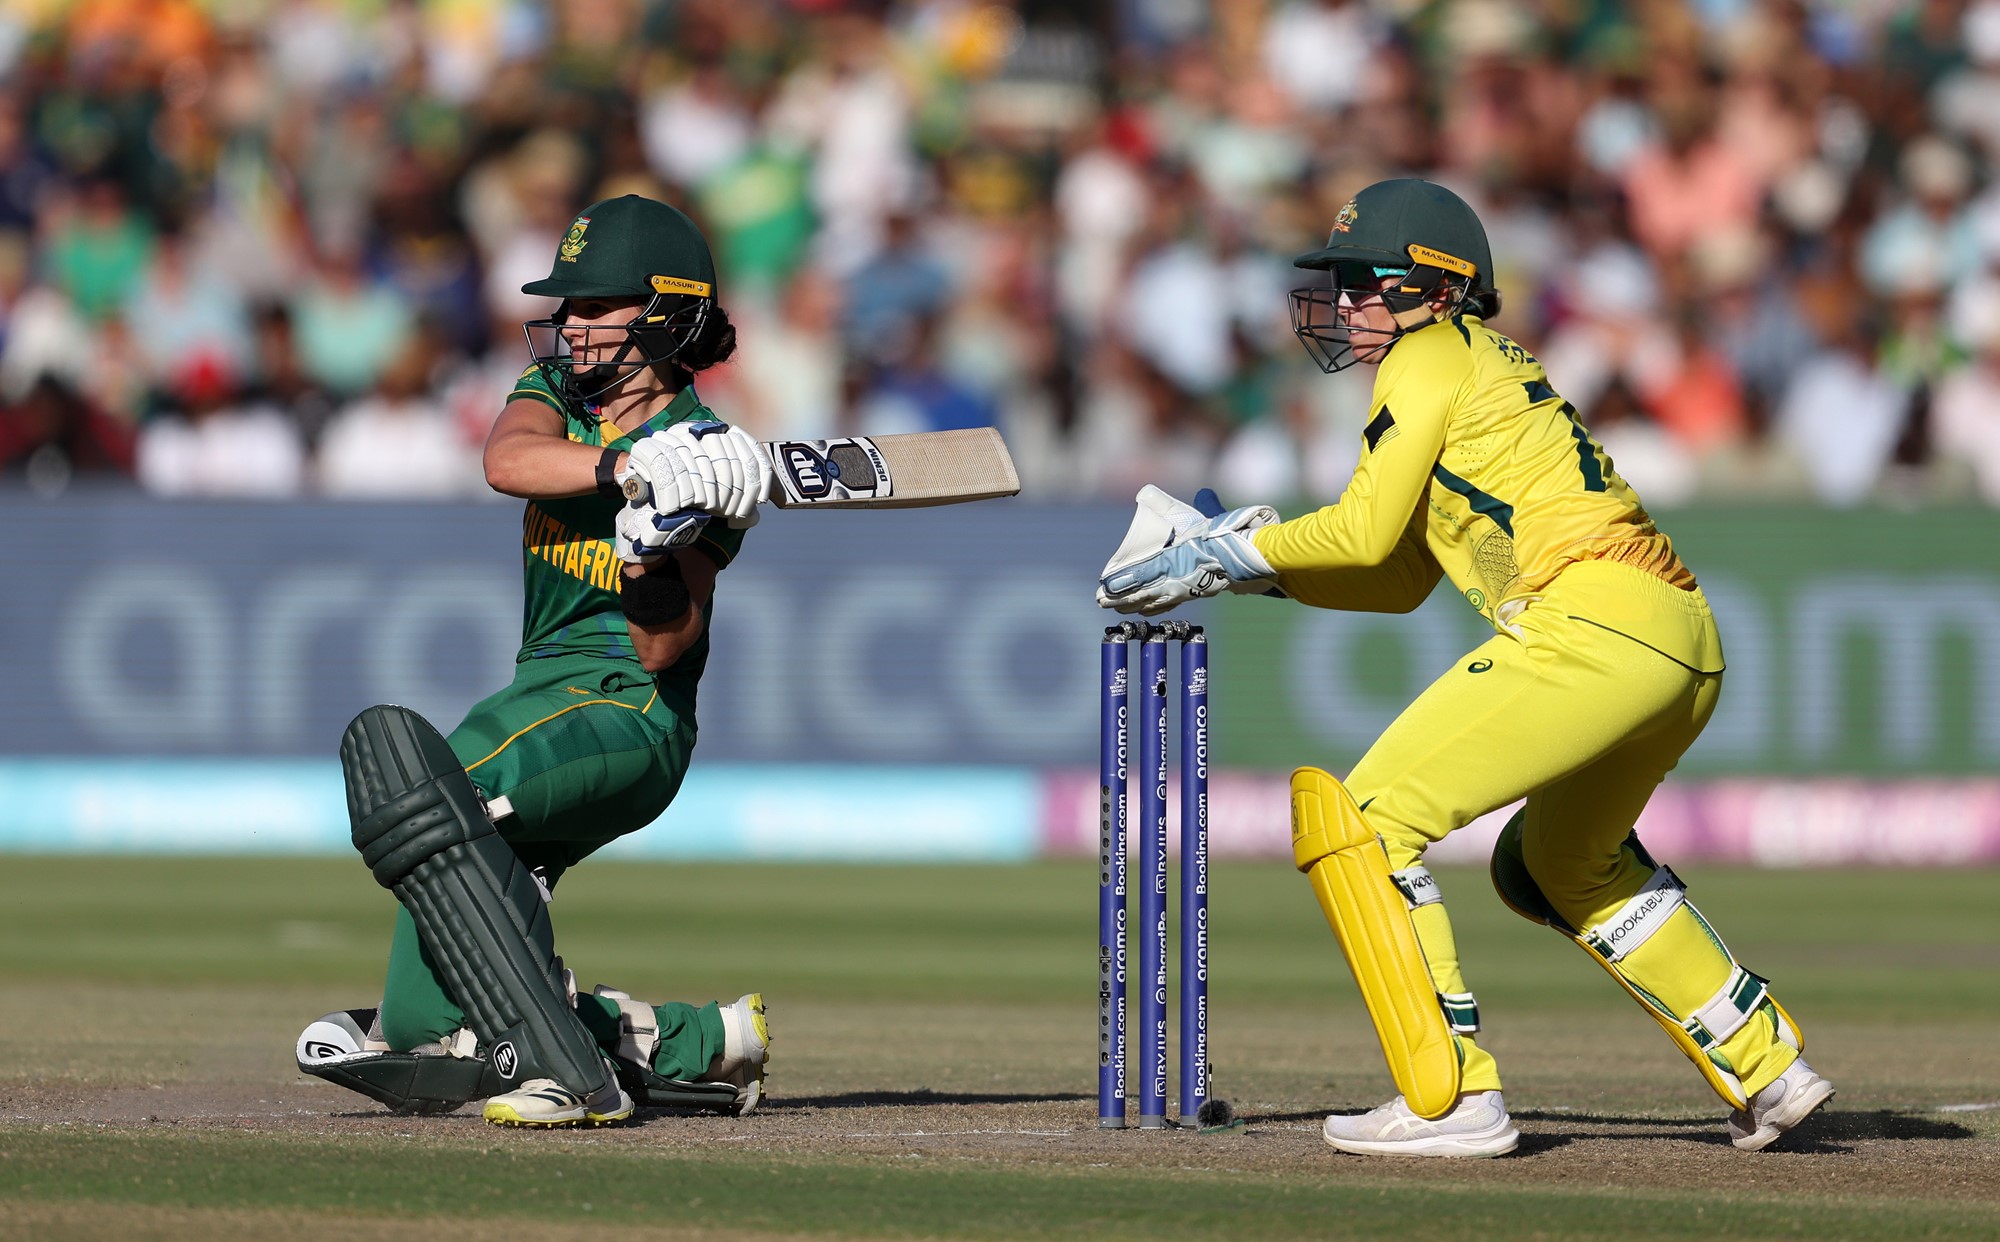 South Africa batter Laura Wolvaardt completes a shot as Australia wicketkeeper Alyssa Healy looks on.